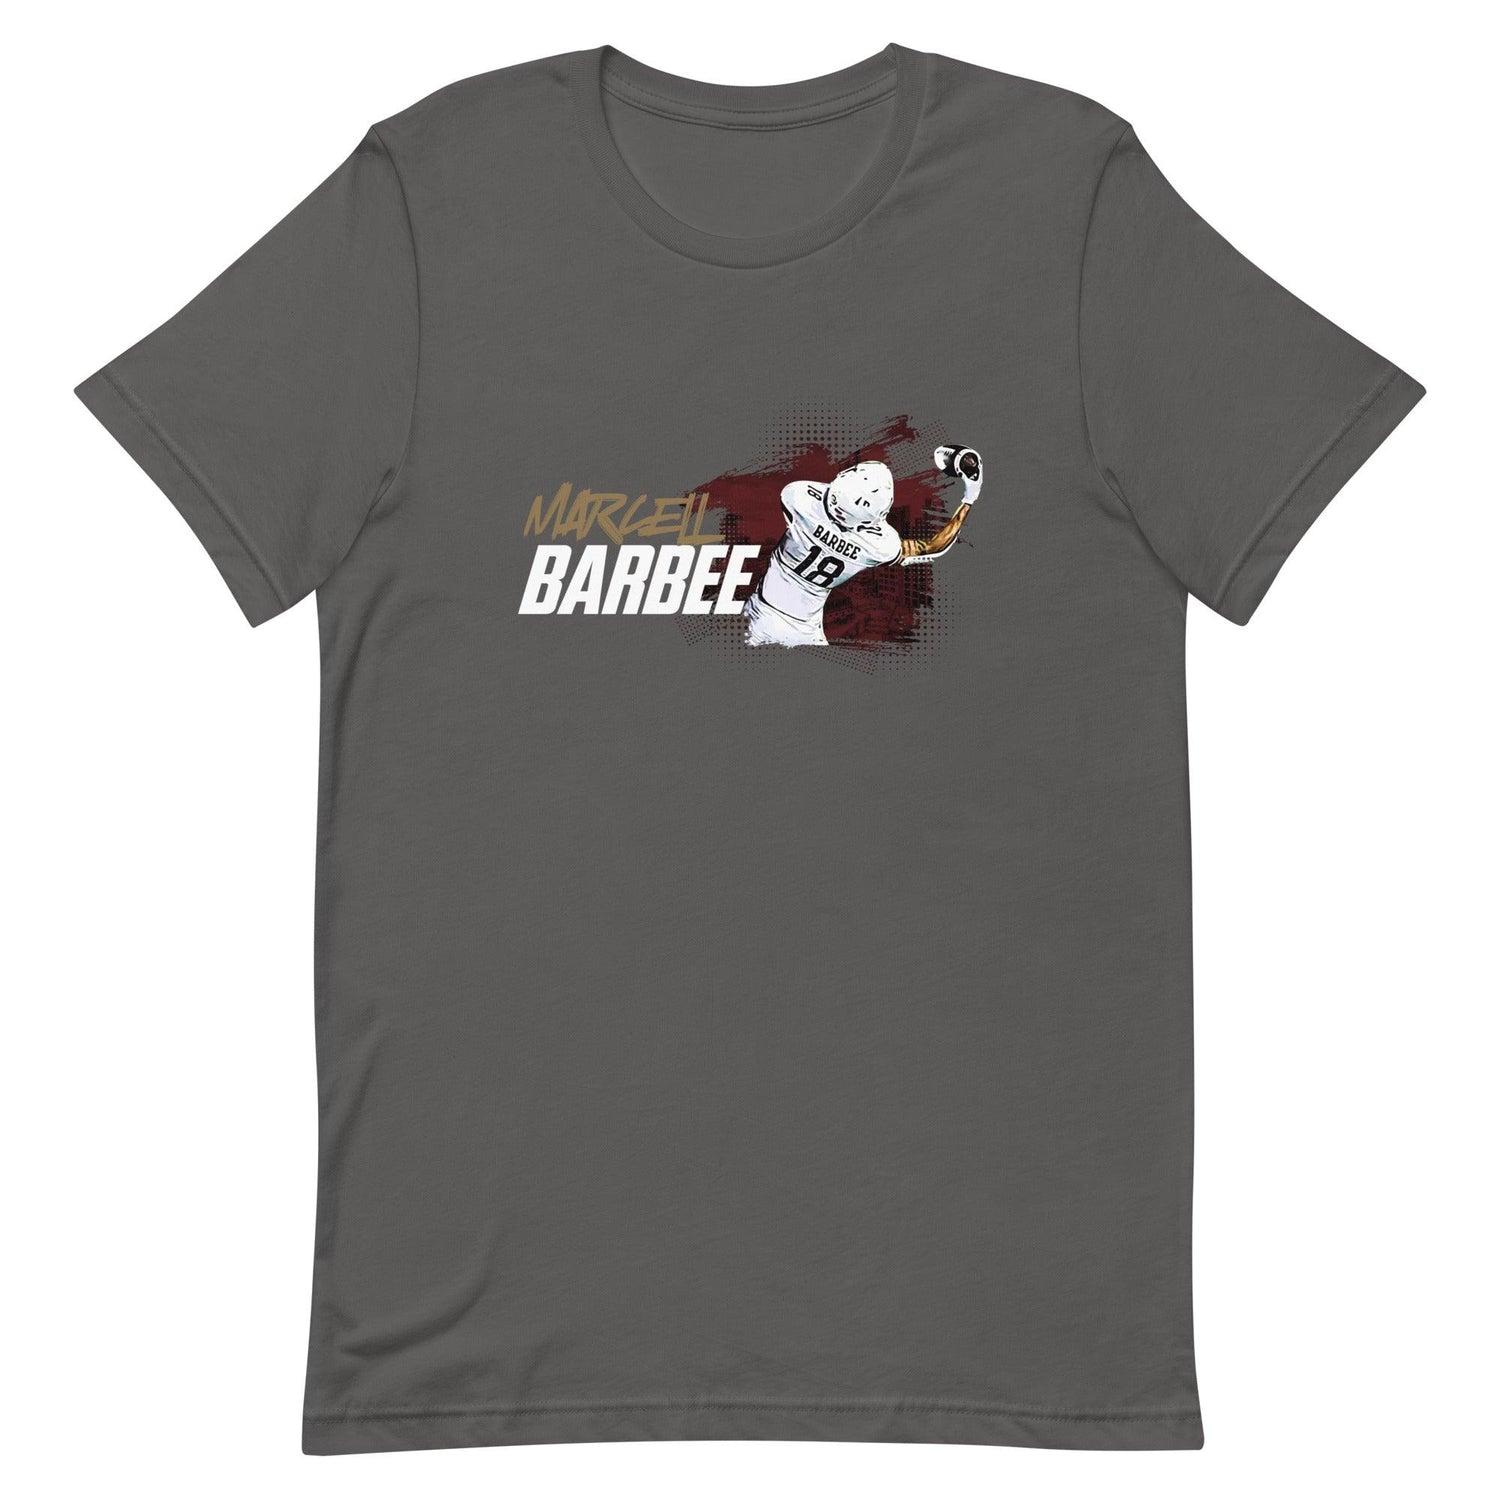 Marcell Barbee "Jersey" t-shirt - Fan Arch